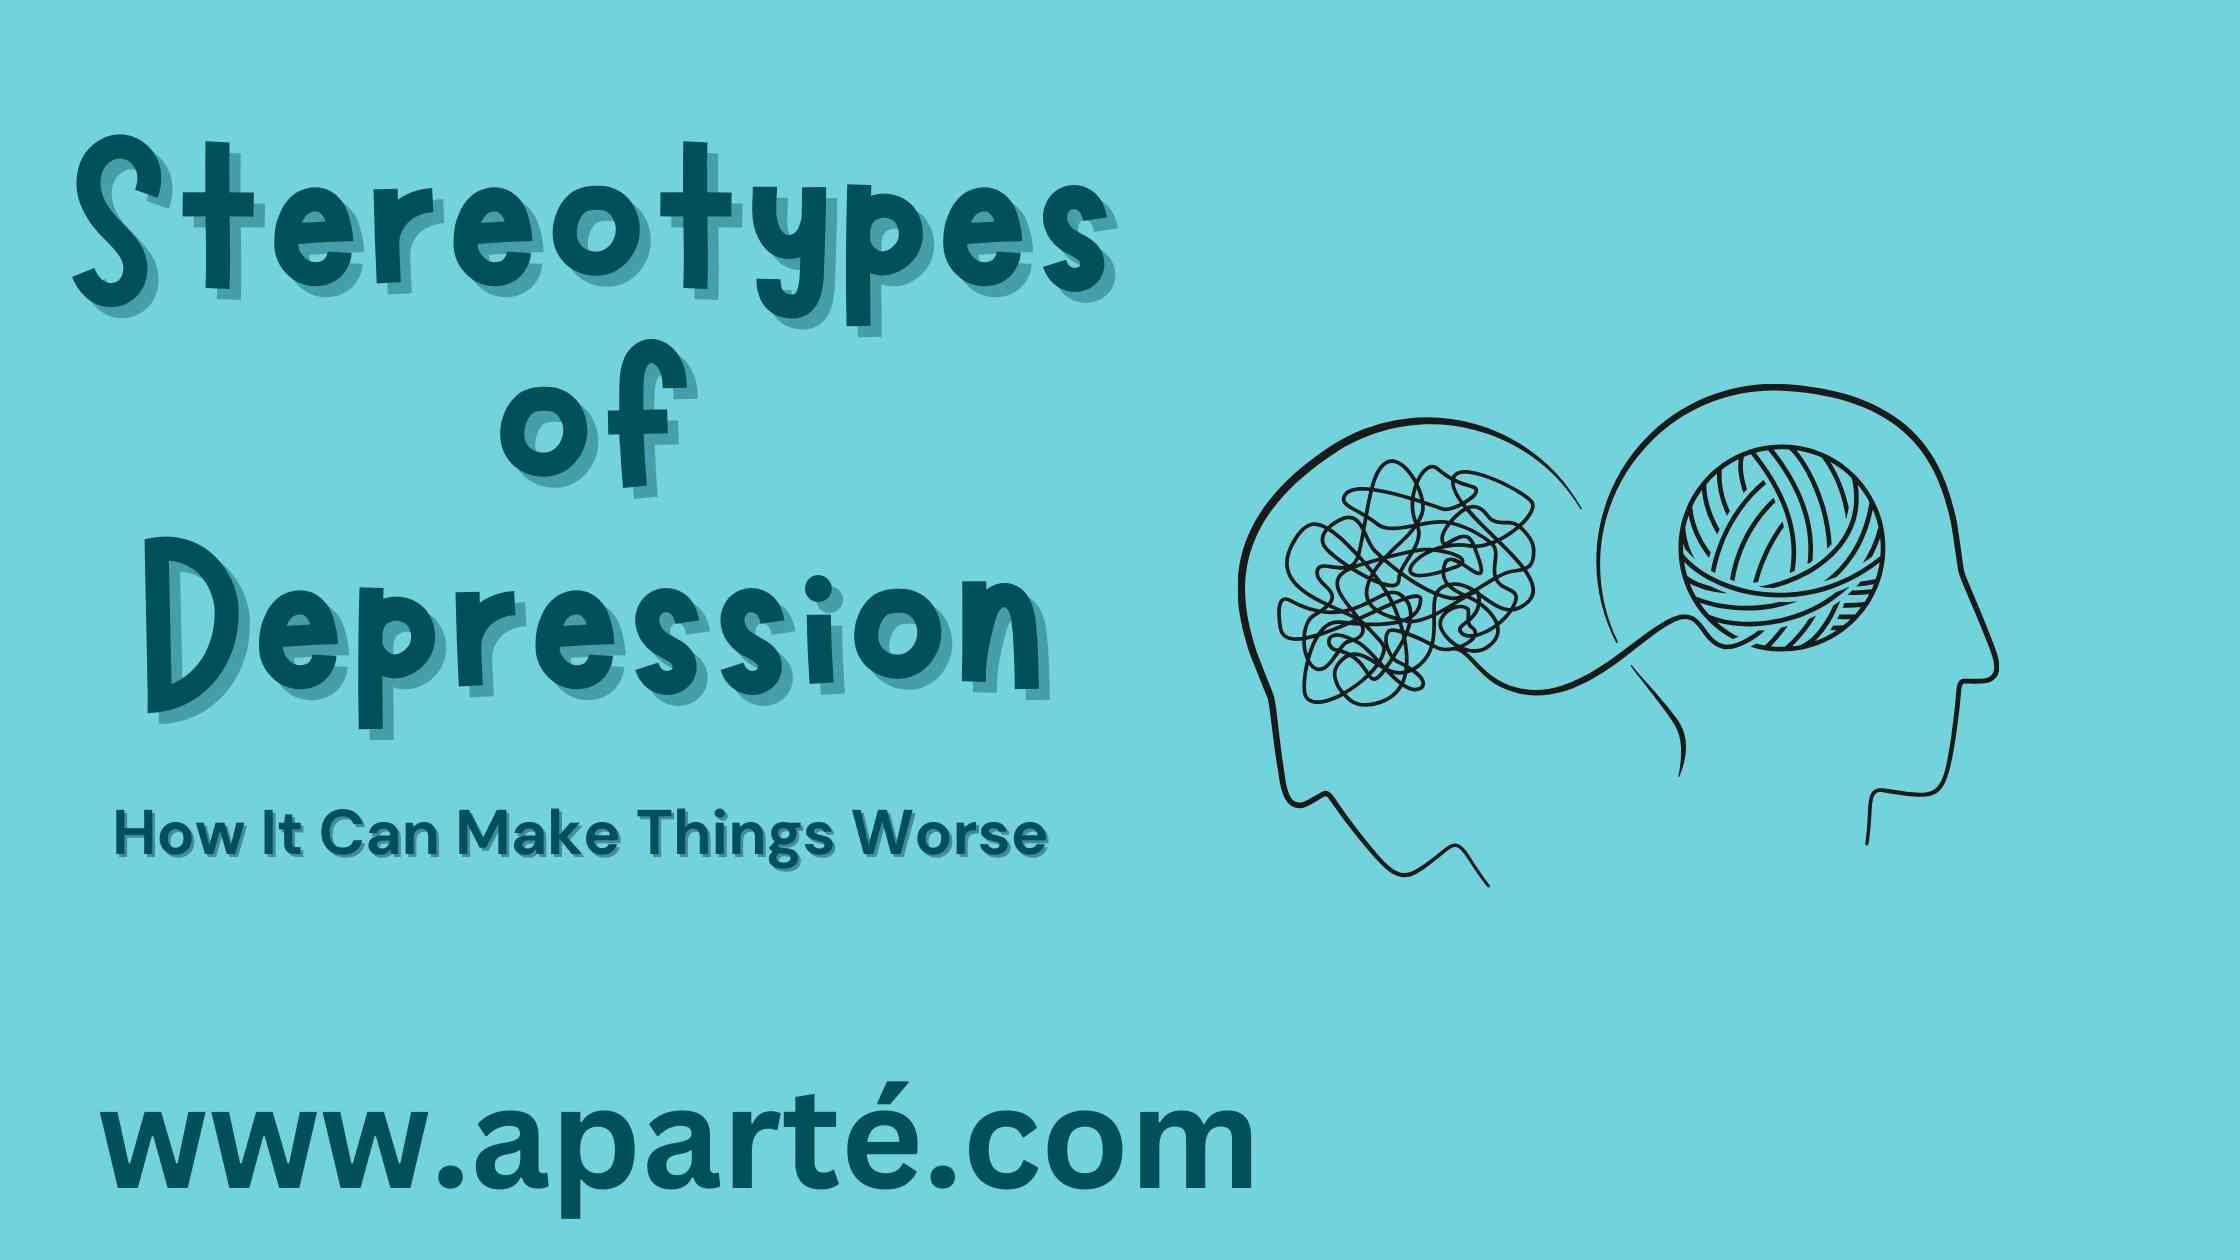 Stereotypes of Depression: How It Can Make Things Worse